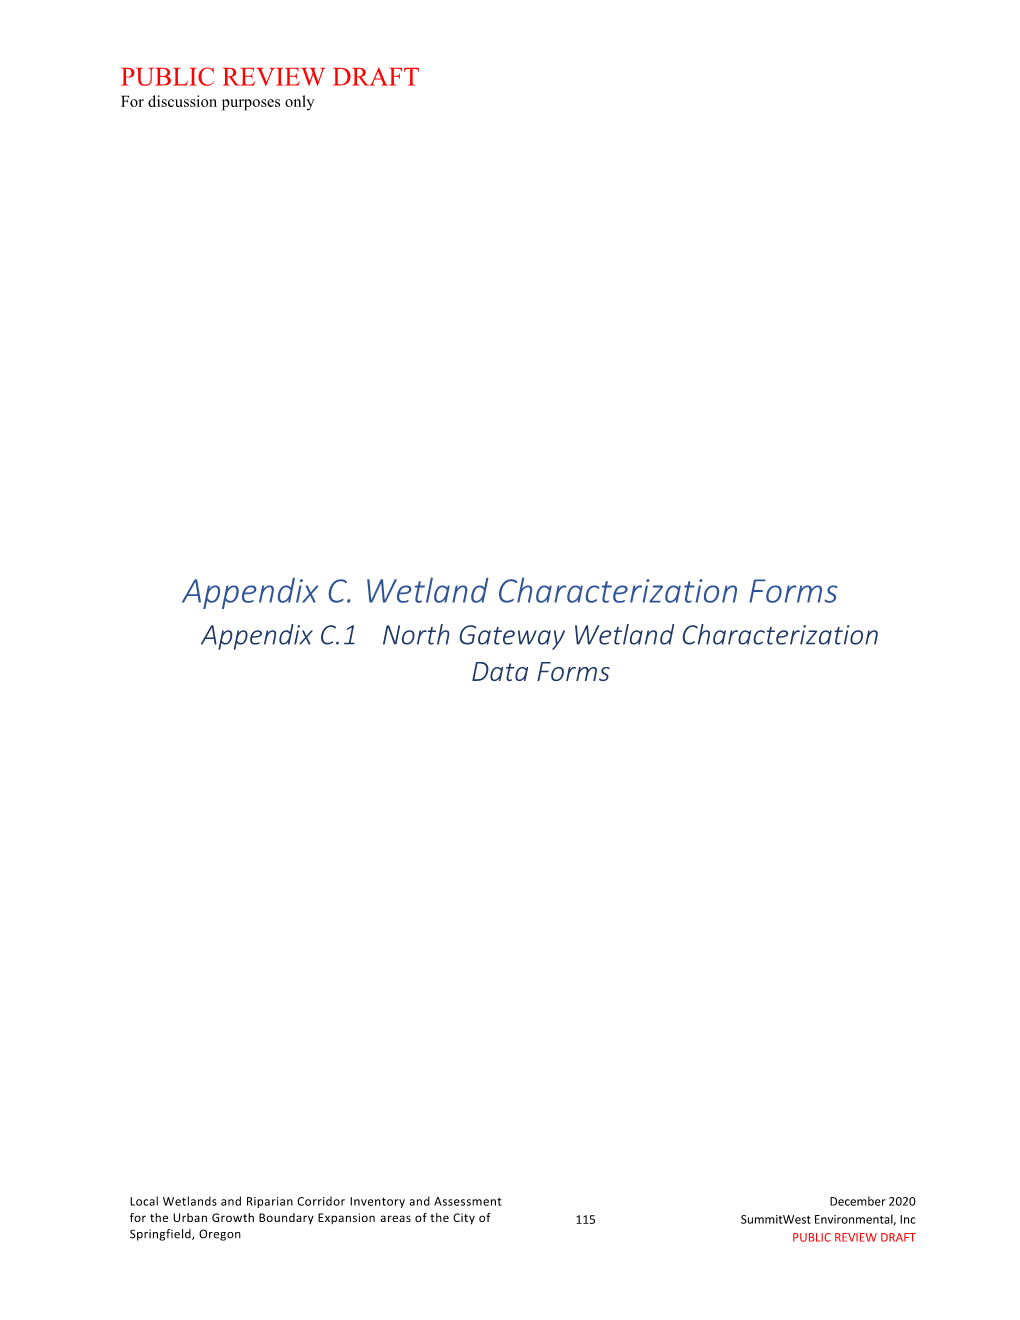 Appendix C. Wetland Characterization Forms Appendix C.1 North Gateway Wetland Characterization Data Forms